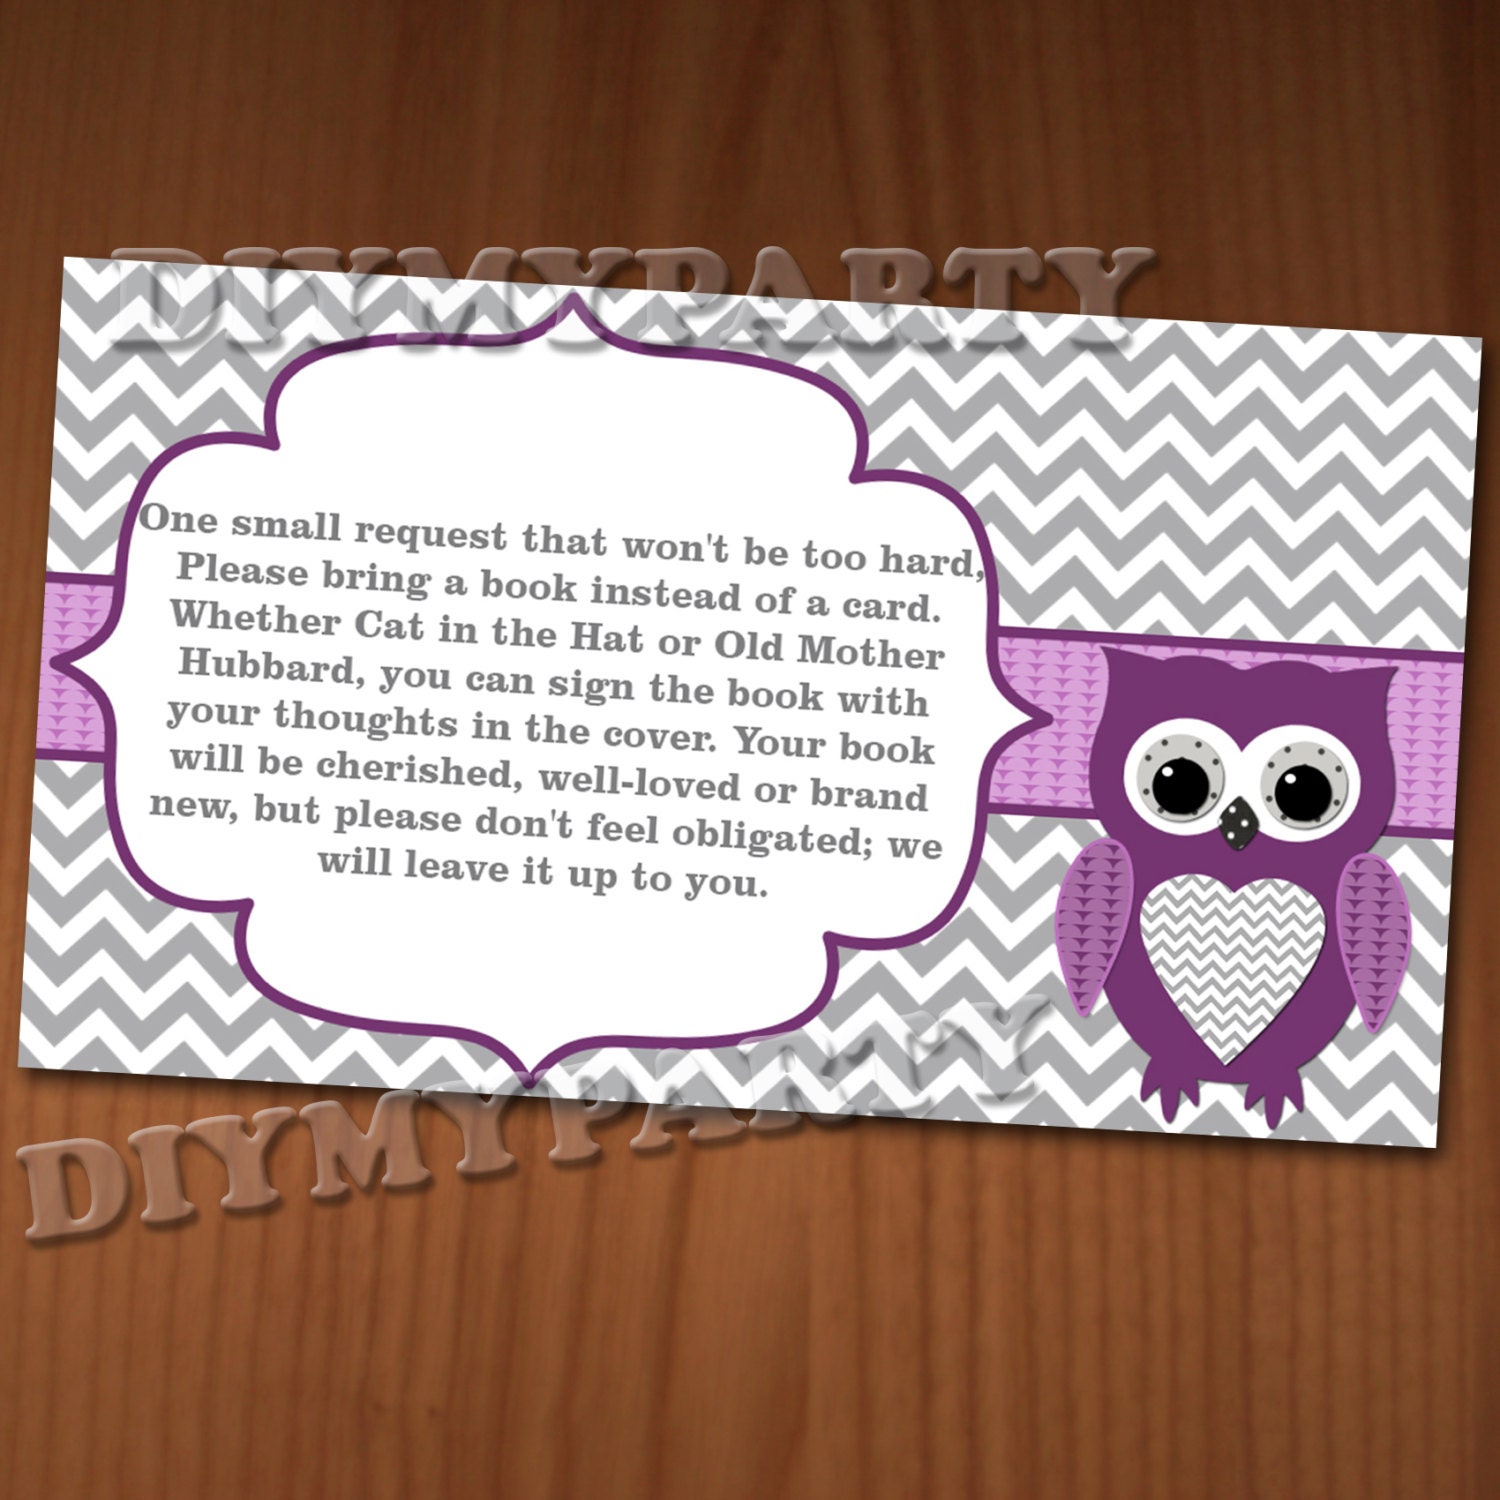 bring-a-book-instead-of-a-card-free-printable-elephant-bring-a-book-card-request-a-book-ticket